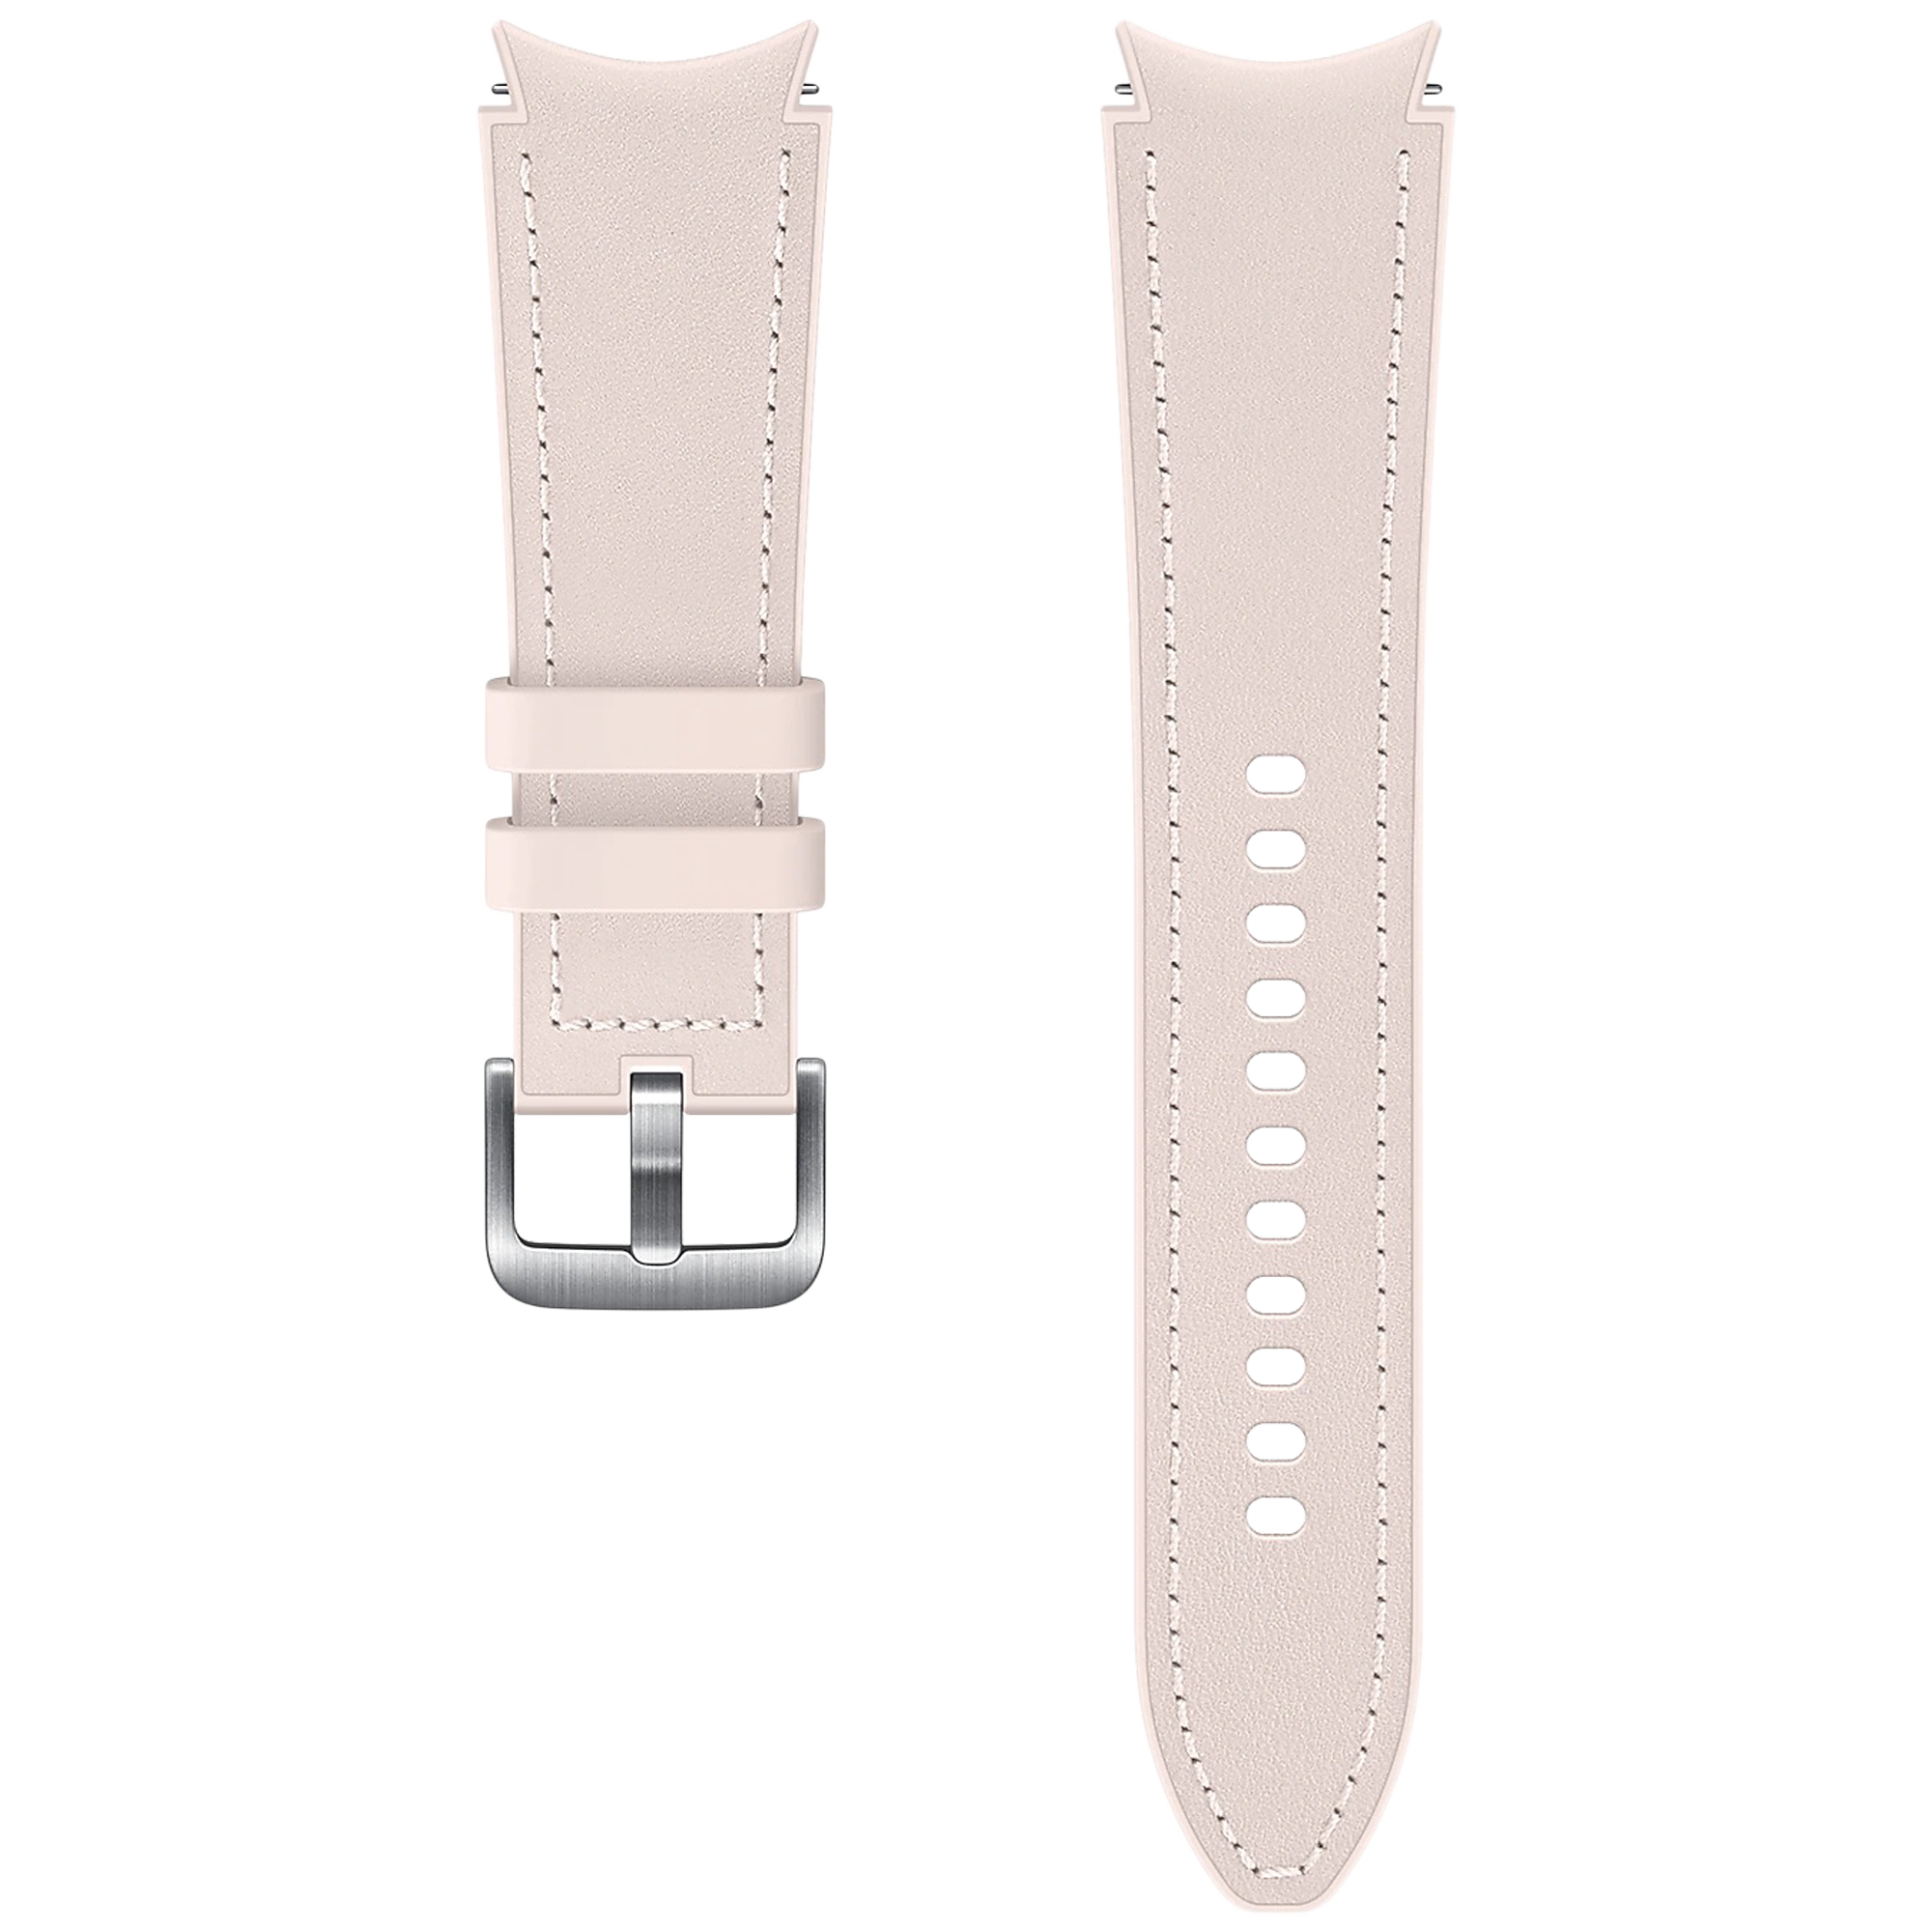 The Tropic Topic – The Iconic Rubber Watch Strap